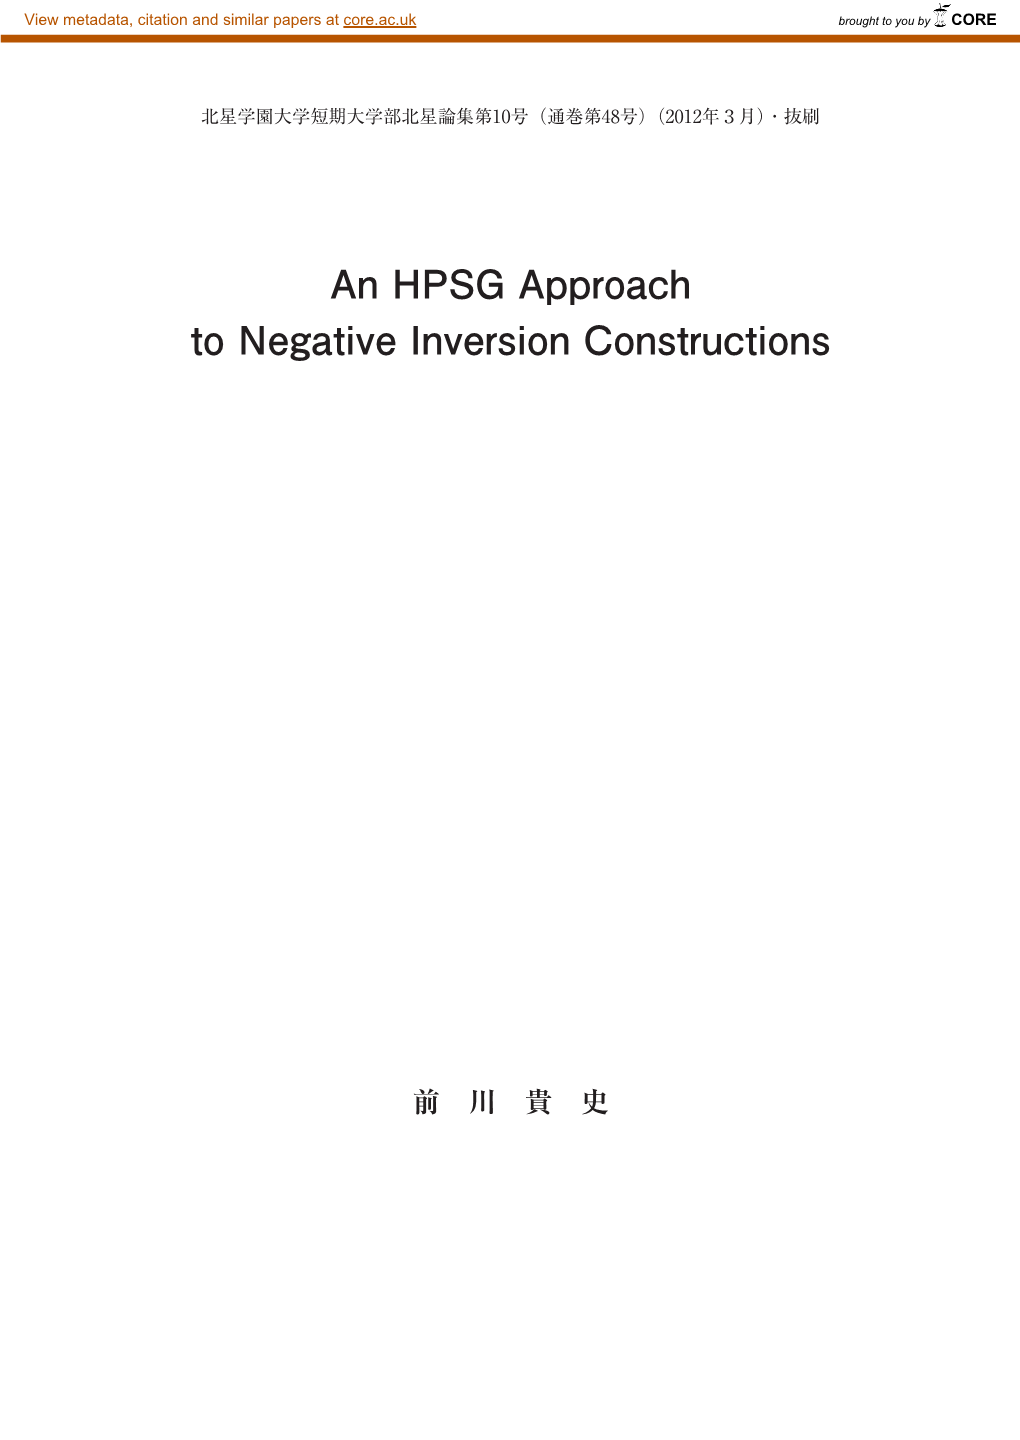 An HPSG Approach to Negative Inversion Constructions